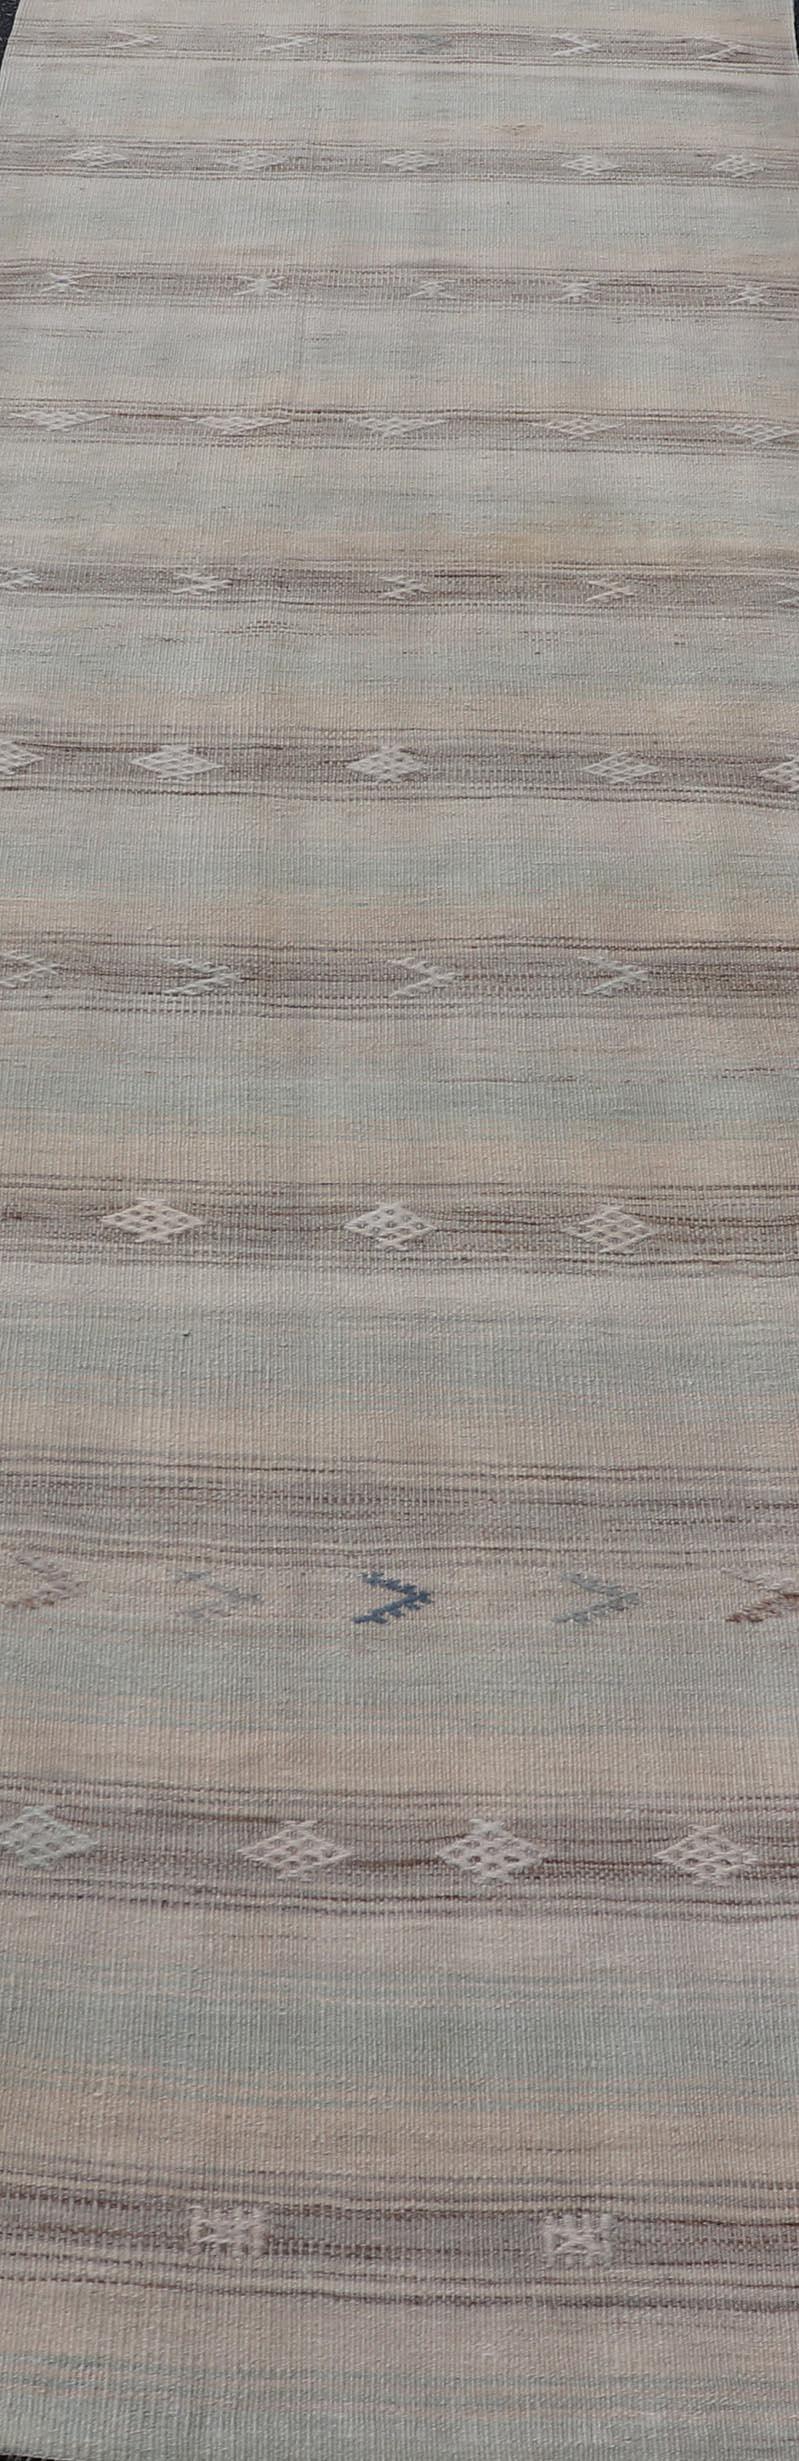 Vintage Kilim runner in stripes and tribal motifs, with embroideries in taupe, light brown, light teal and light green, Keivan Woven Arts rug EN-179377, country of origin / type: Turkey / Kilim, circa Mid-20th Century.

Measures: 2'8 x 10'10.